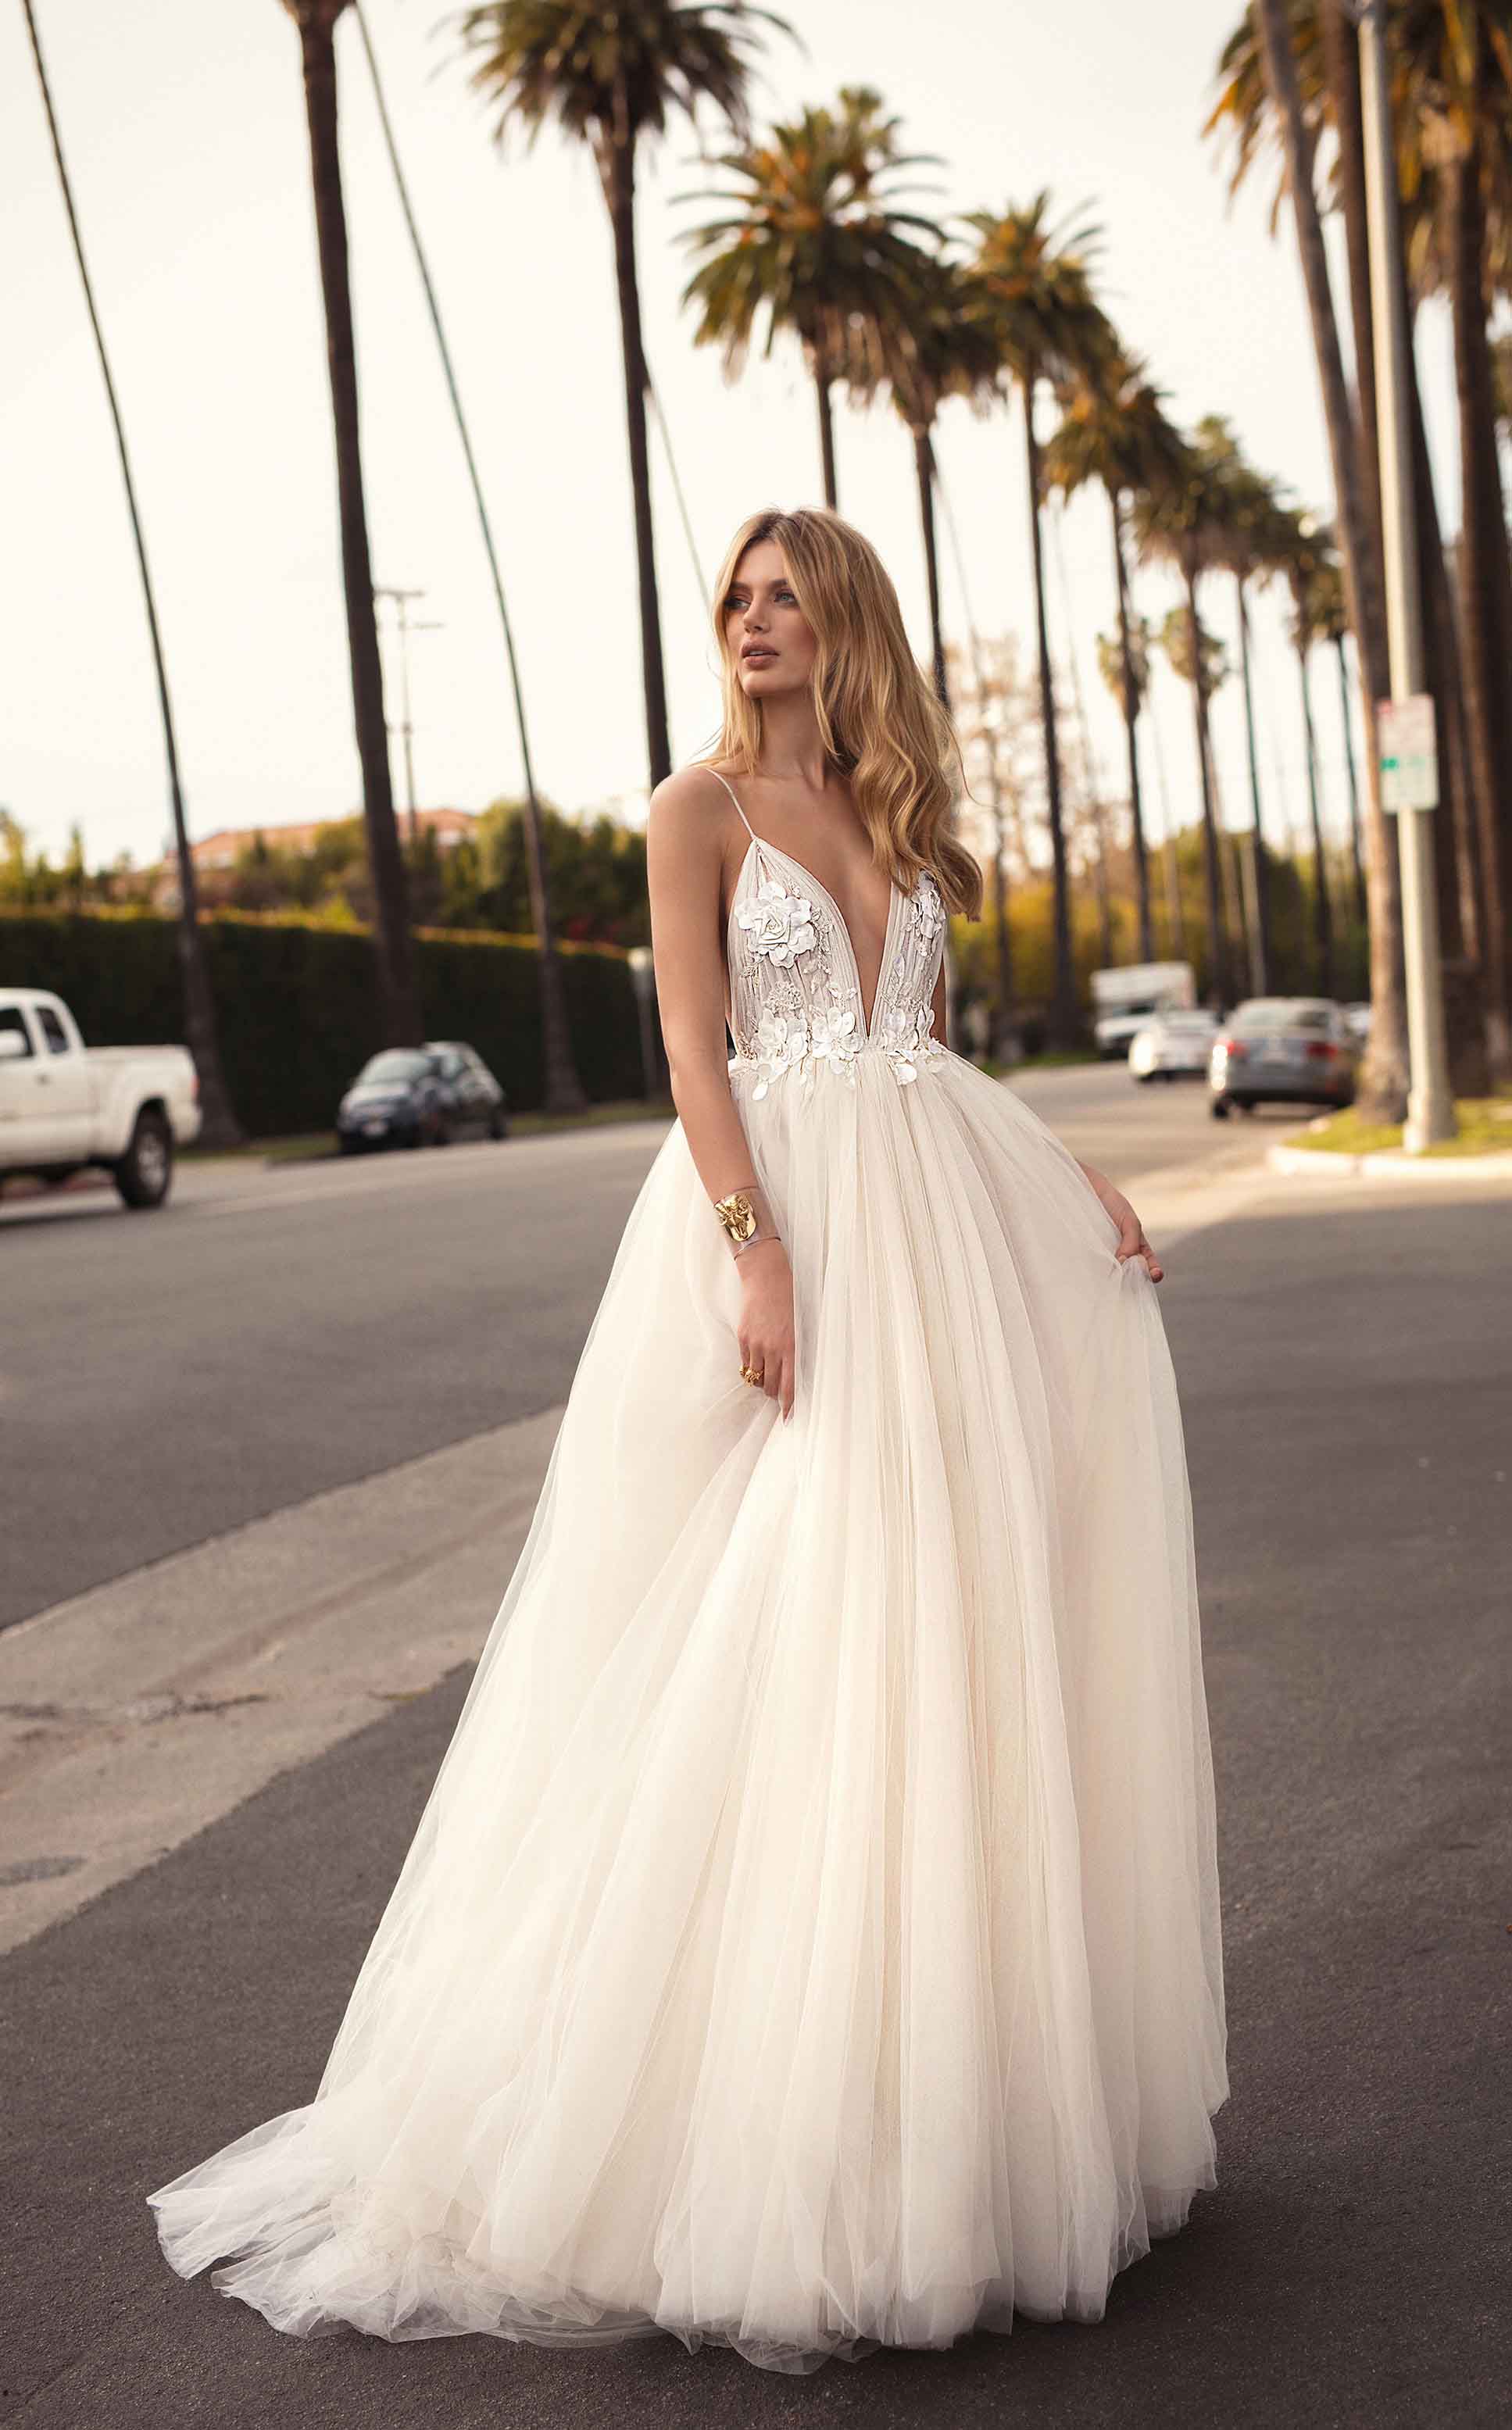 MUSE BY BERTA 2019 COLLECT CITY OF ANGELS